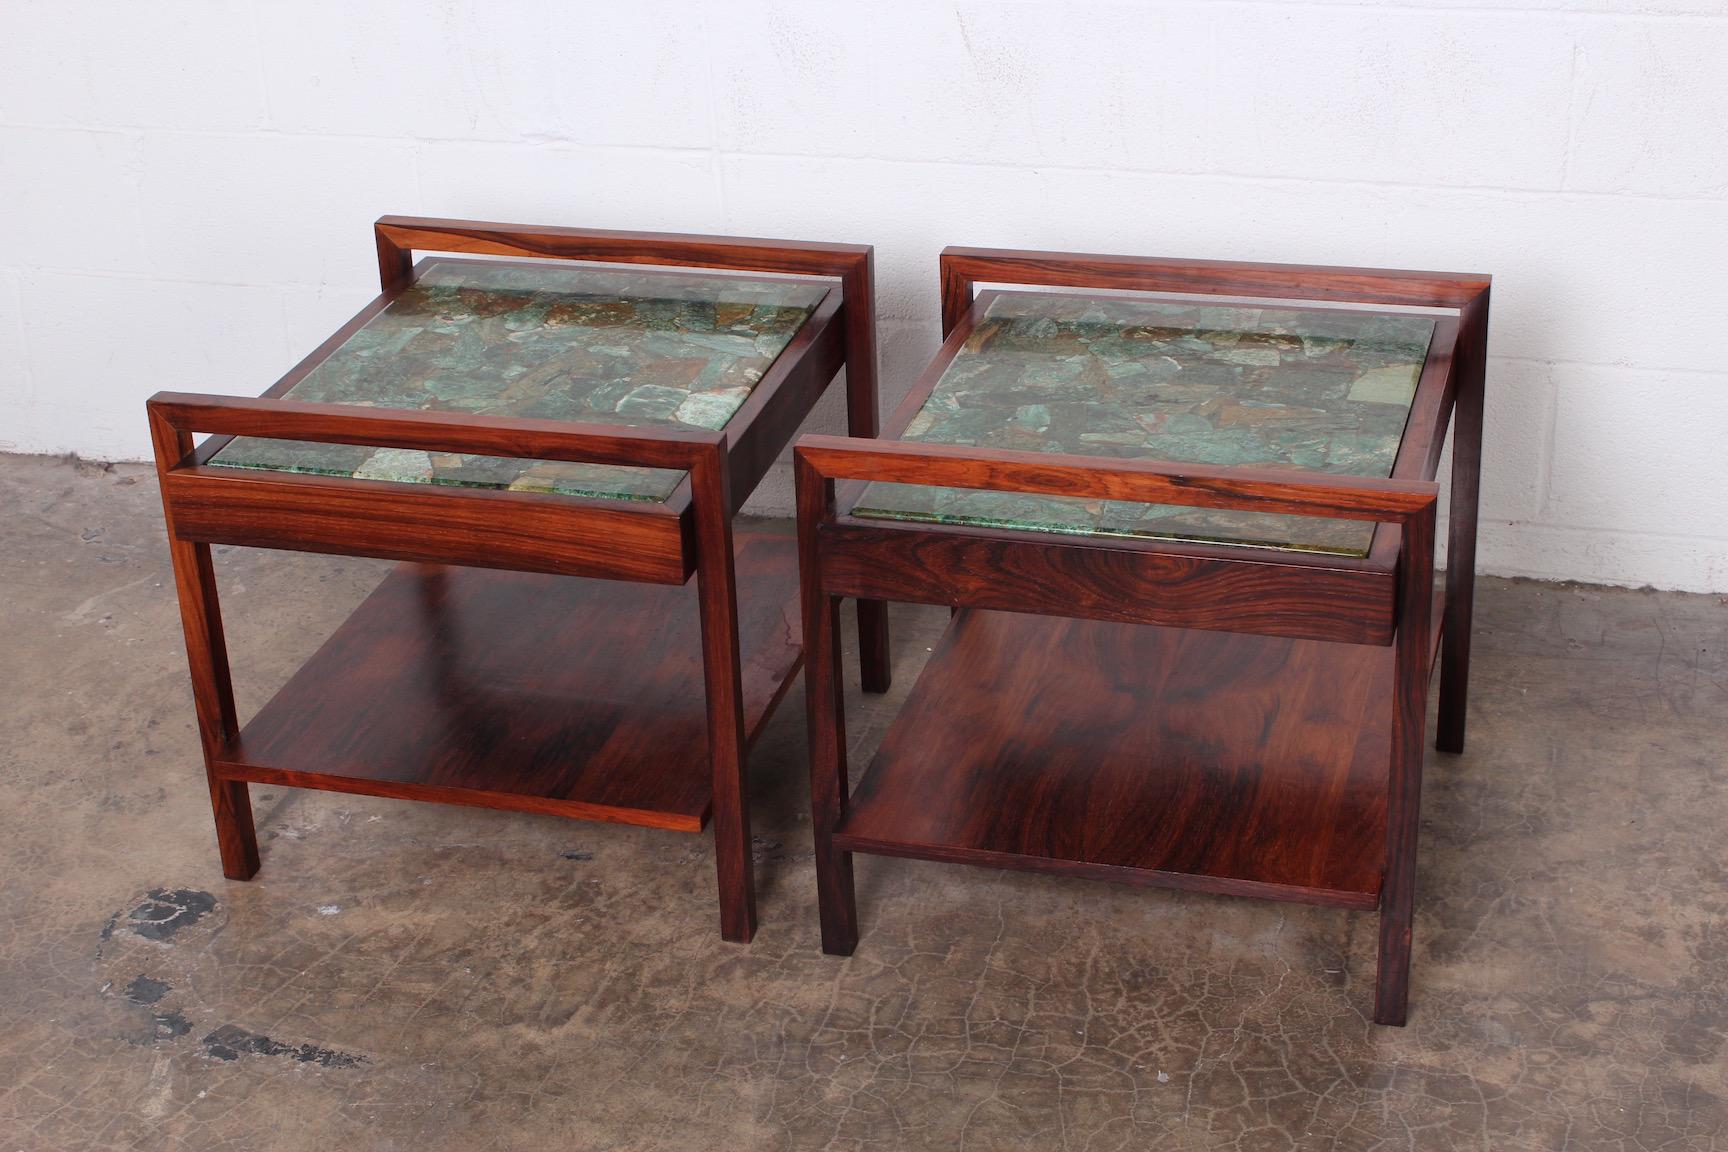 A beautiful pair of solid rosewood tables with green agate tops.